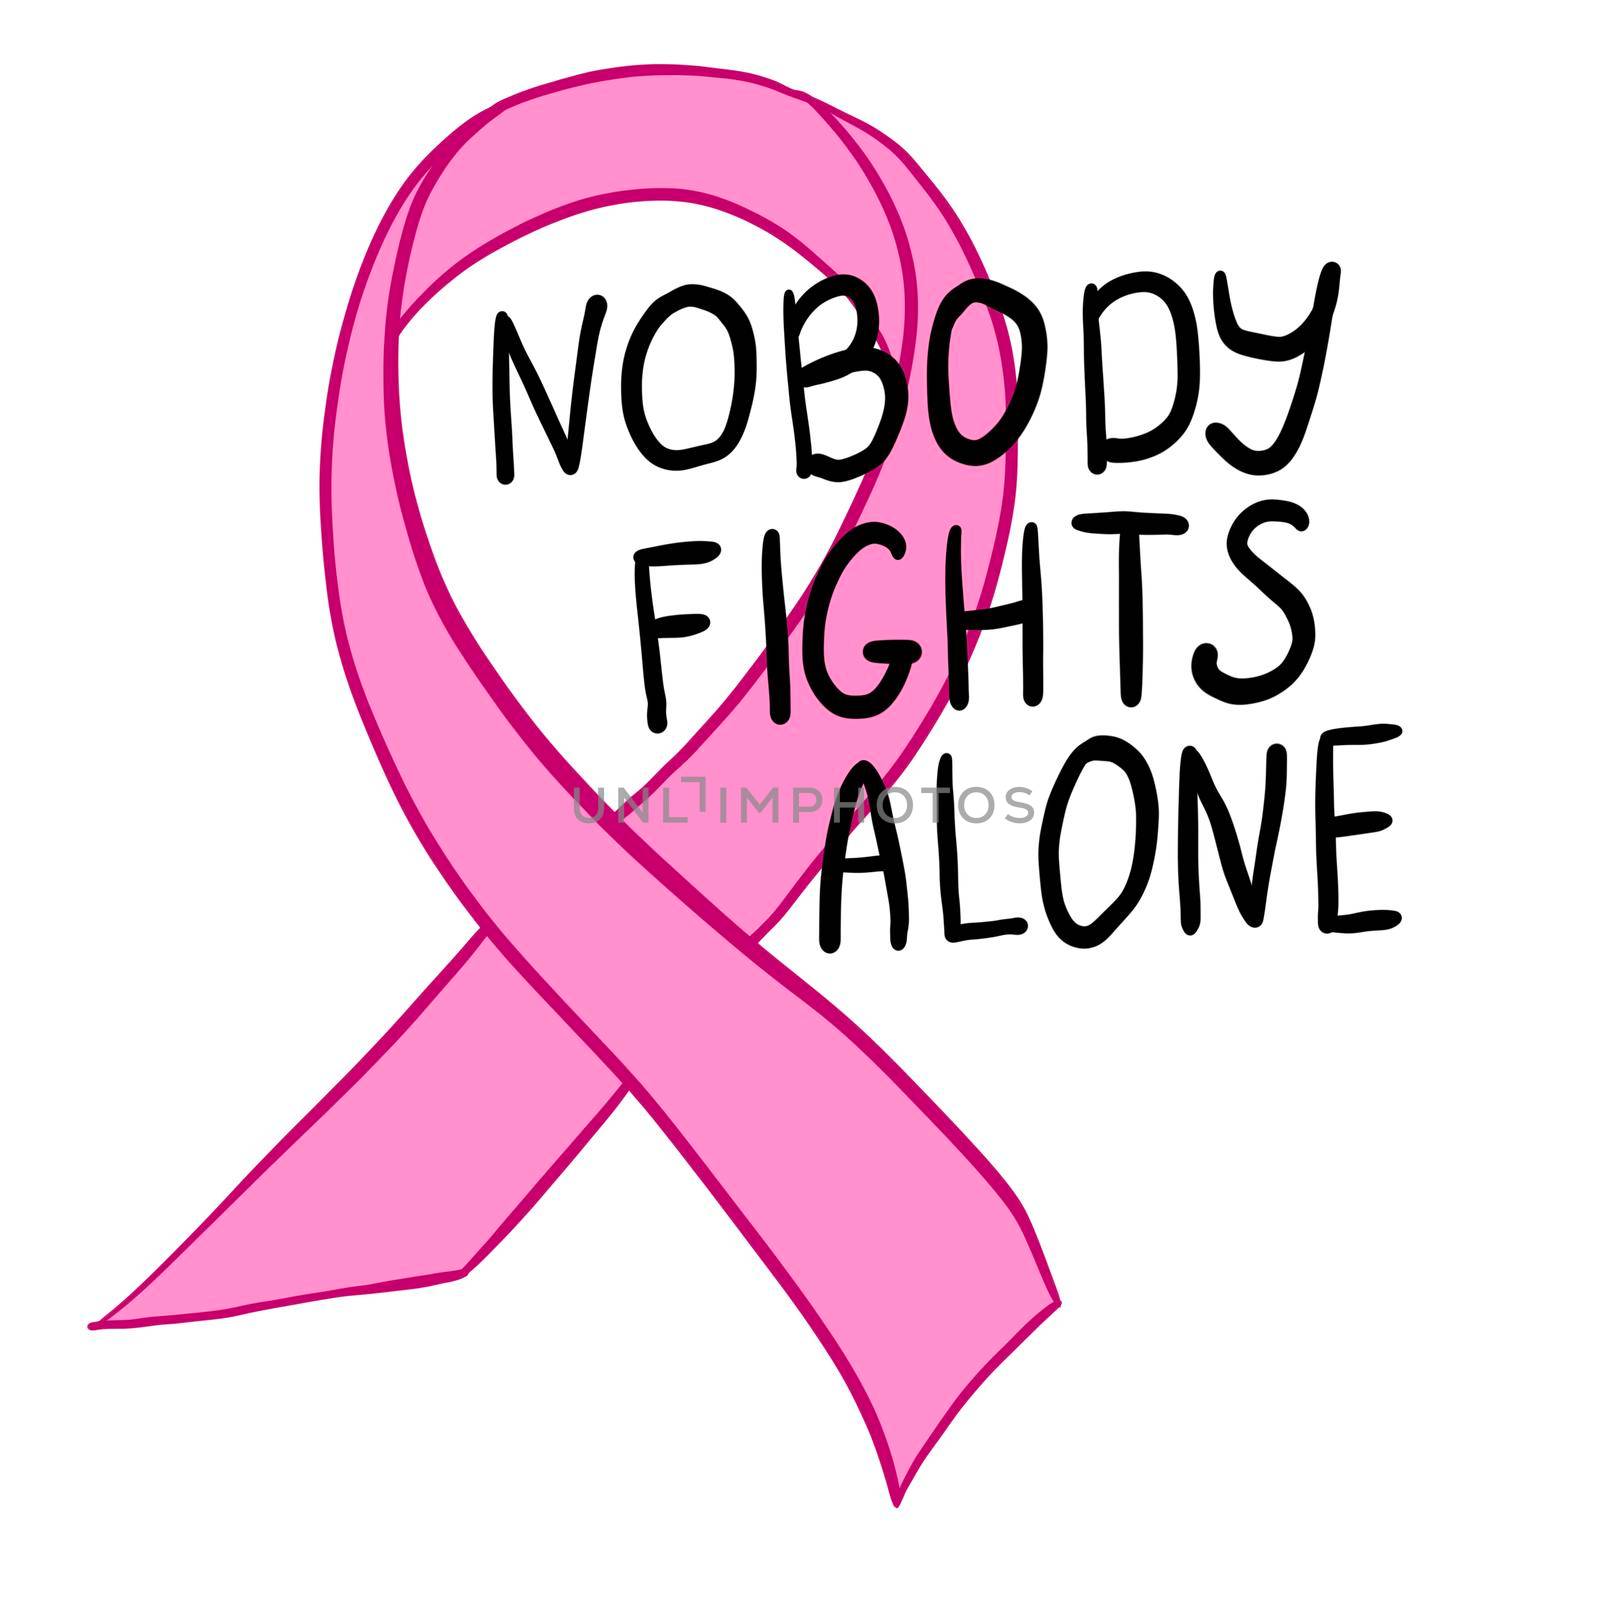 Nobody fights alone. Breast cancer awareness month hand drawn illustration in black and pink. Disease illness ribbon for health protection, medical prevention concept. Women's healthcare design